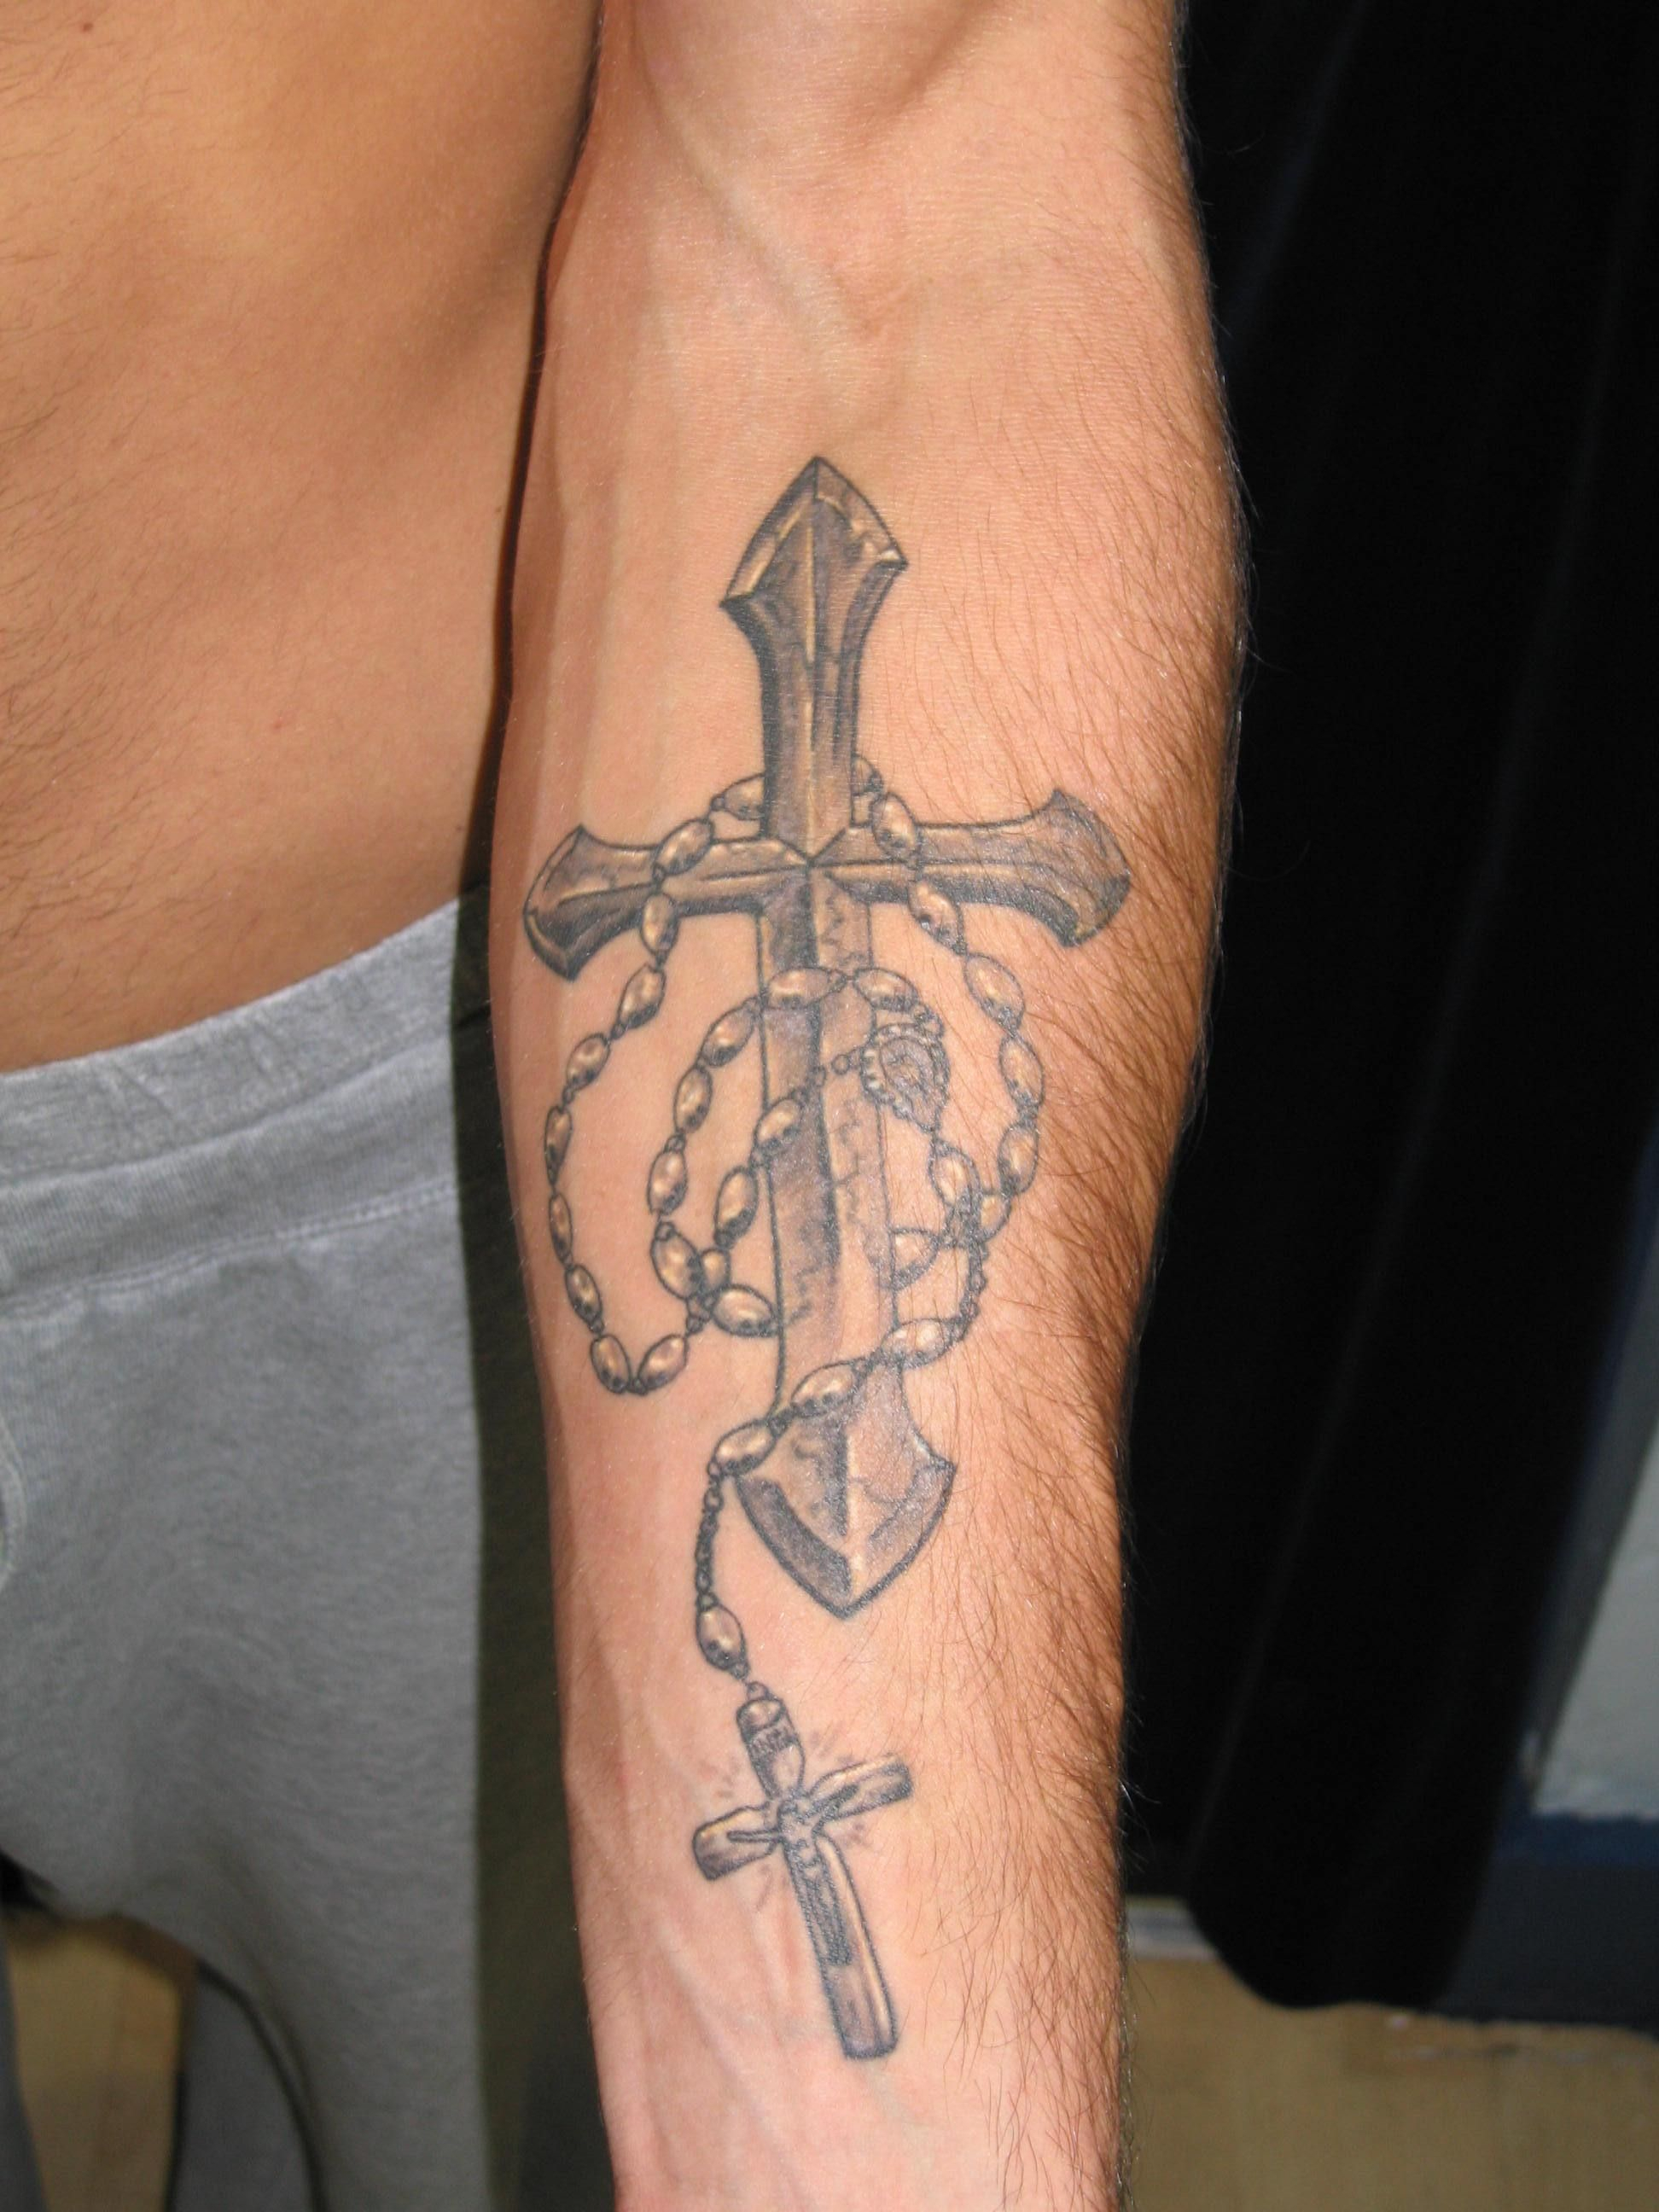 20 Cross Tattoos Design Ideas For Men And Women Zg Cross Tattoo intended for size 1944 X 2592